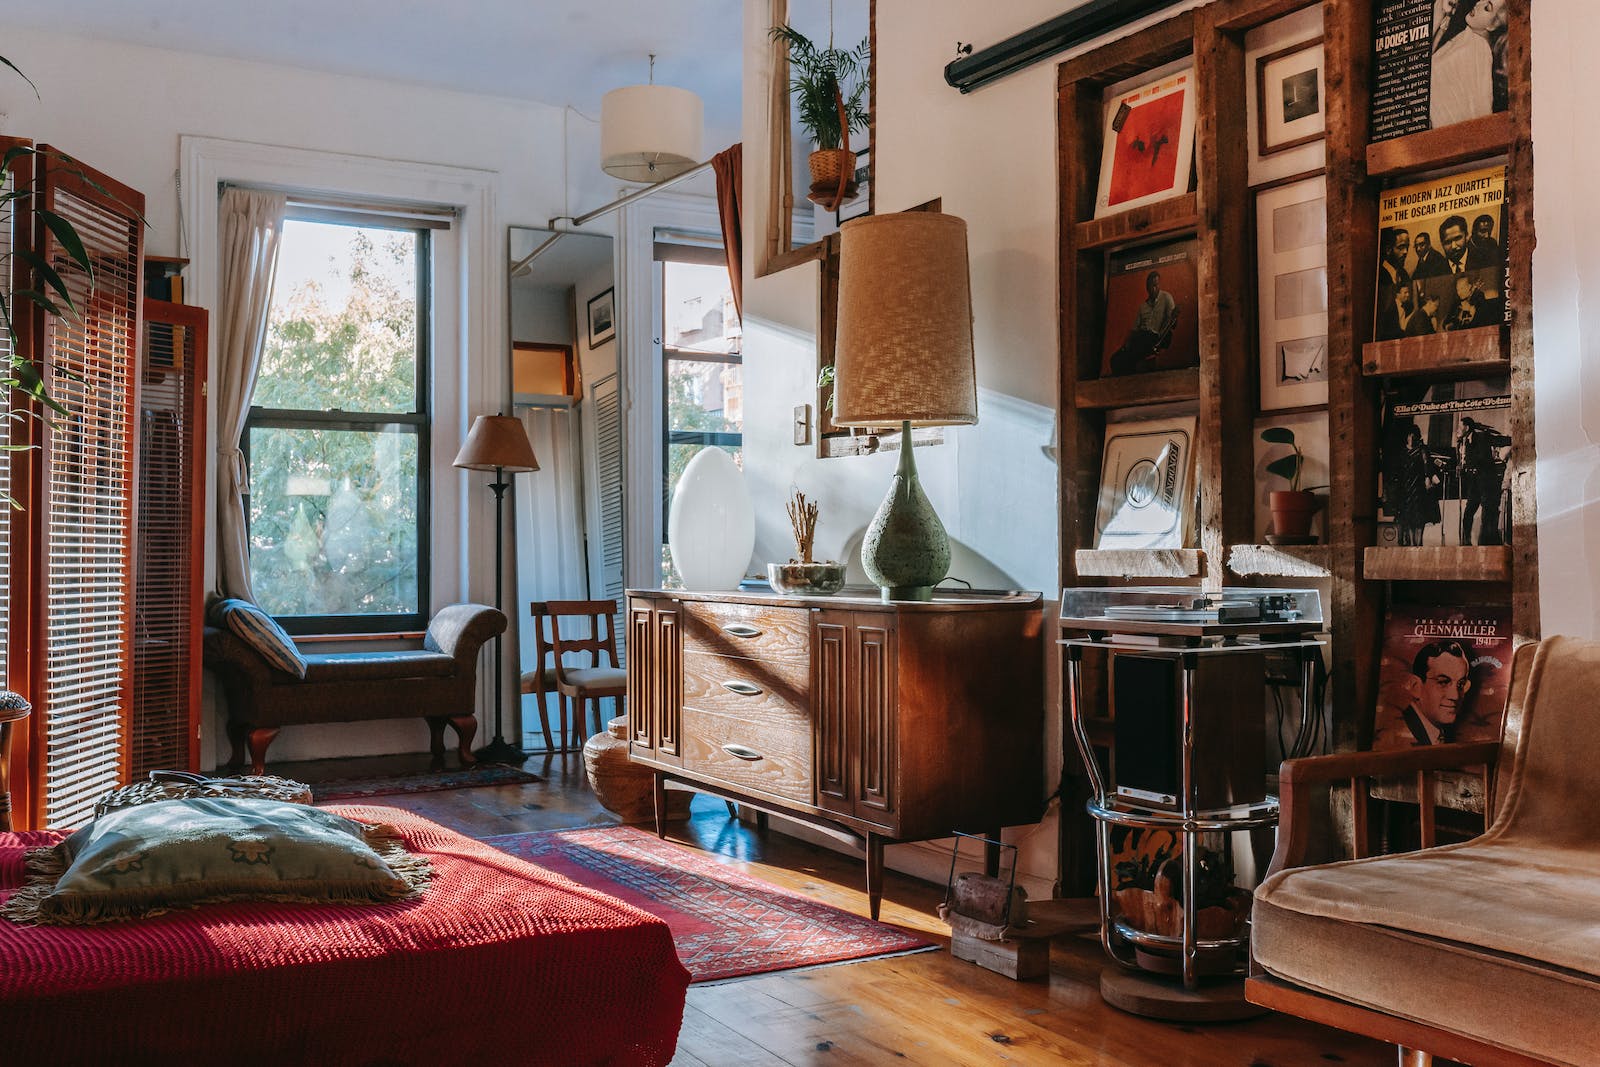 Interior of cozy studio with bed and couch decorated with vintage furniture and vinyl records